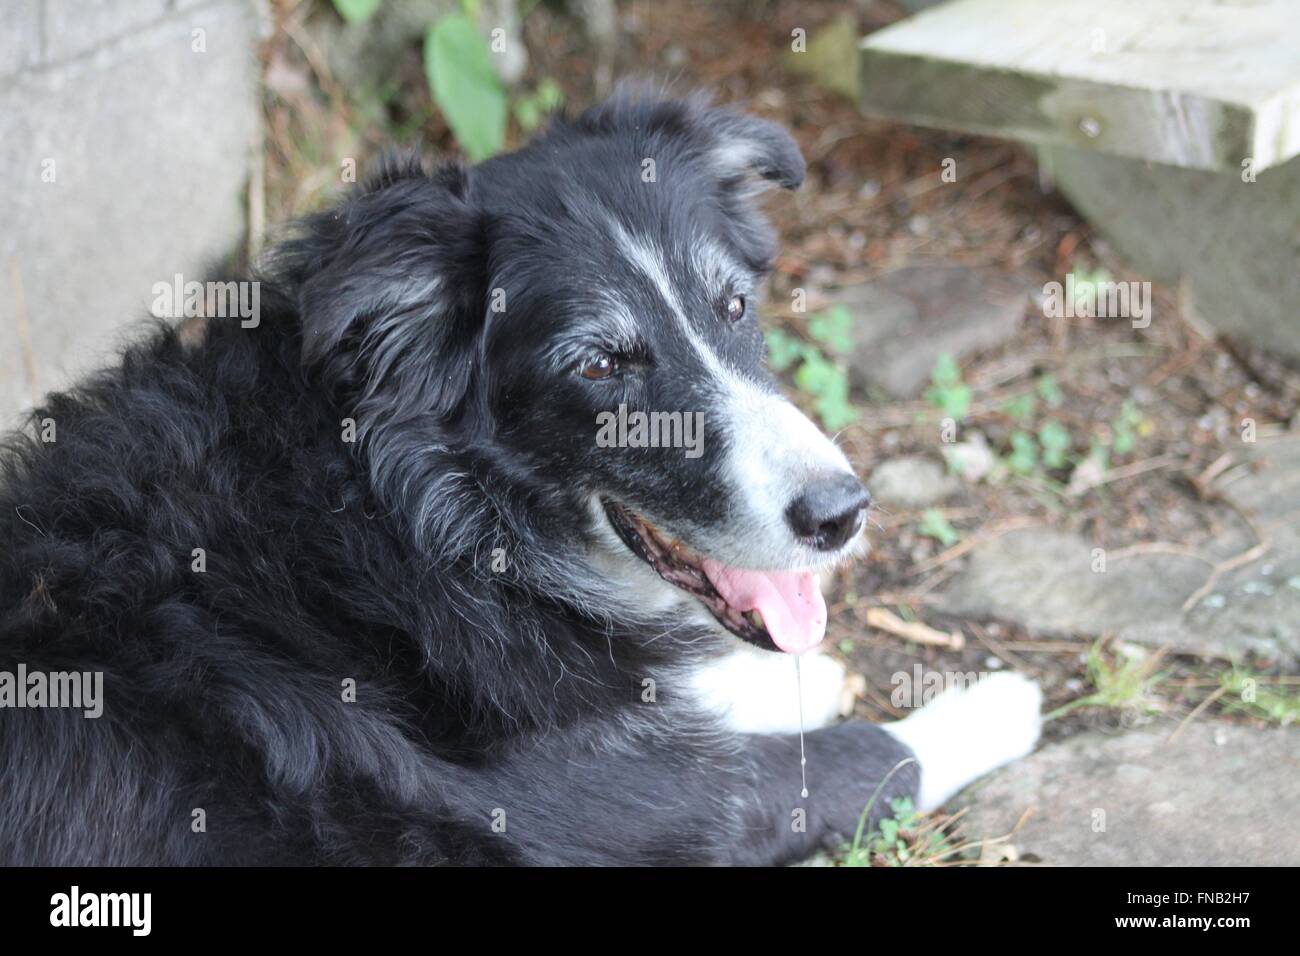 Head and shoulder area of a long-haired, black and white dog. Stock Photo